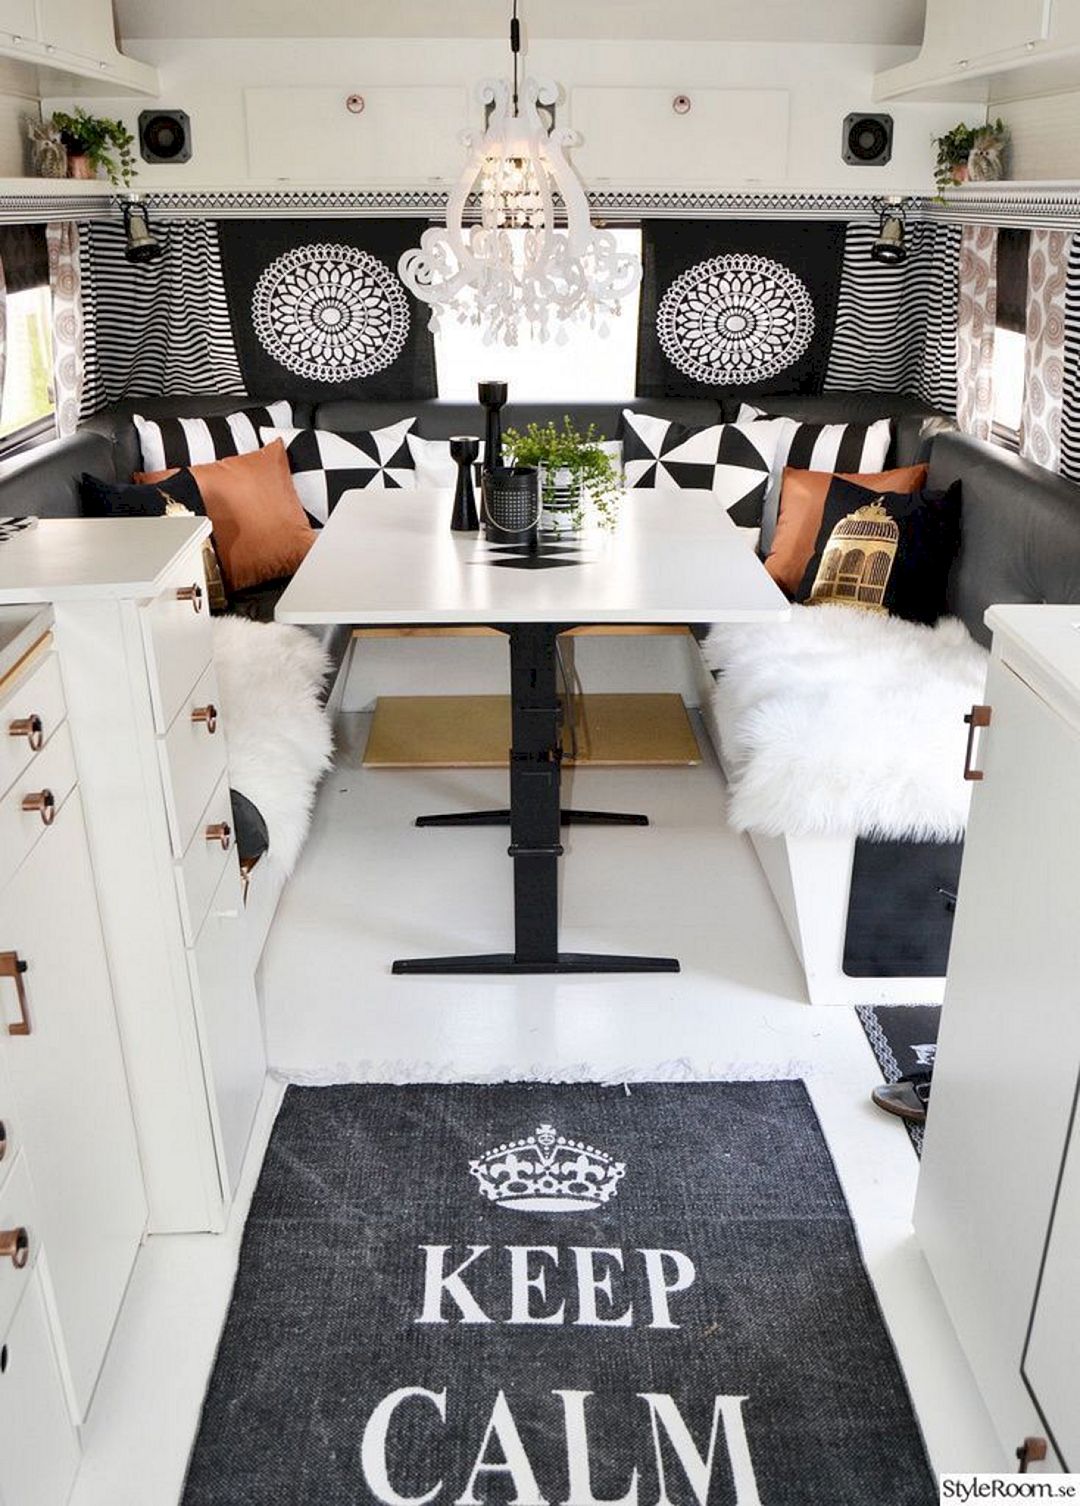 Rv Hacks Remodel Interiors Ideas With White color